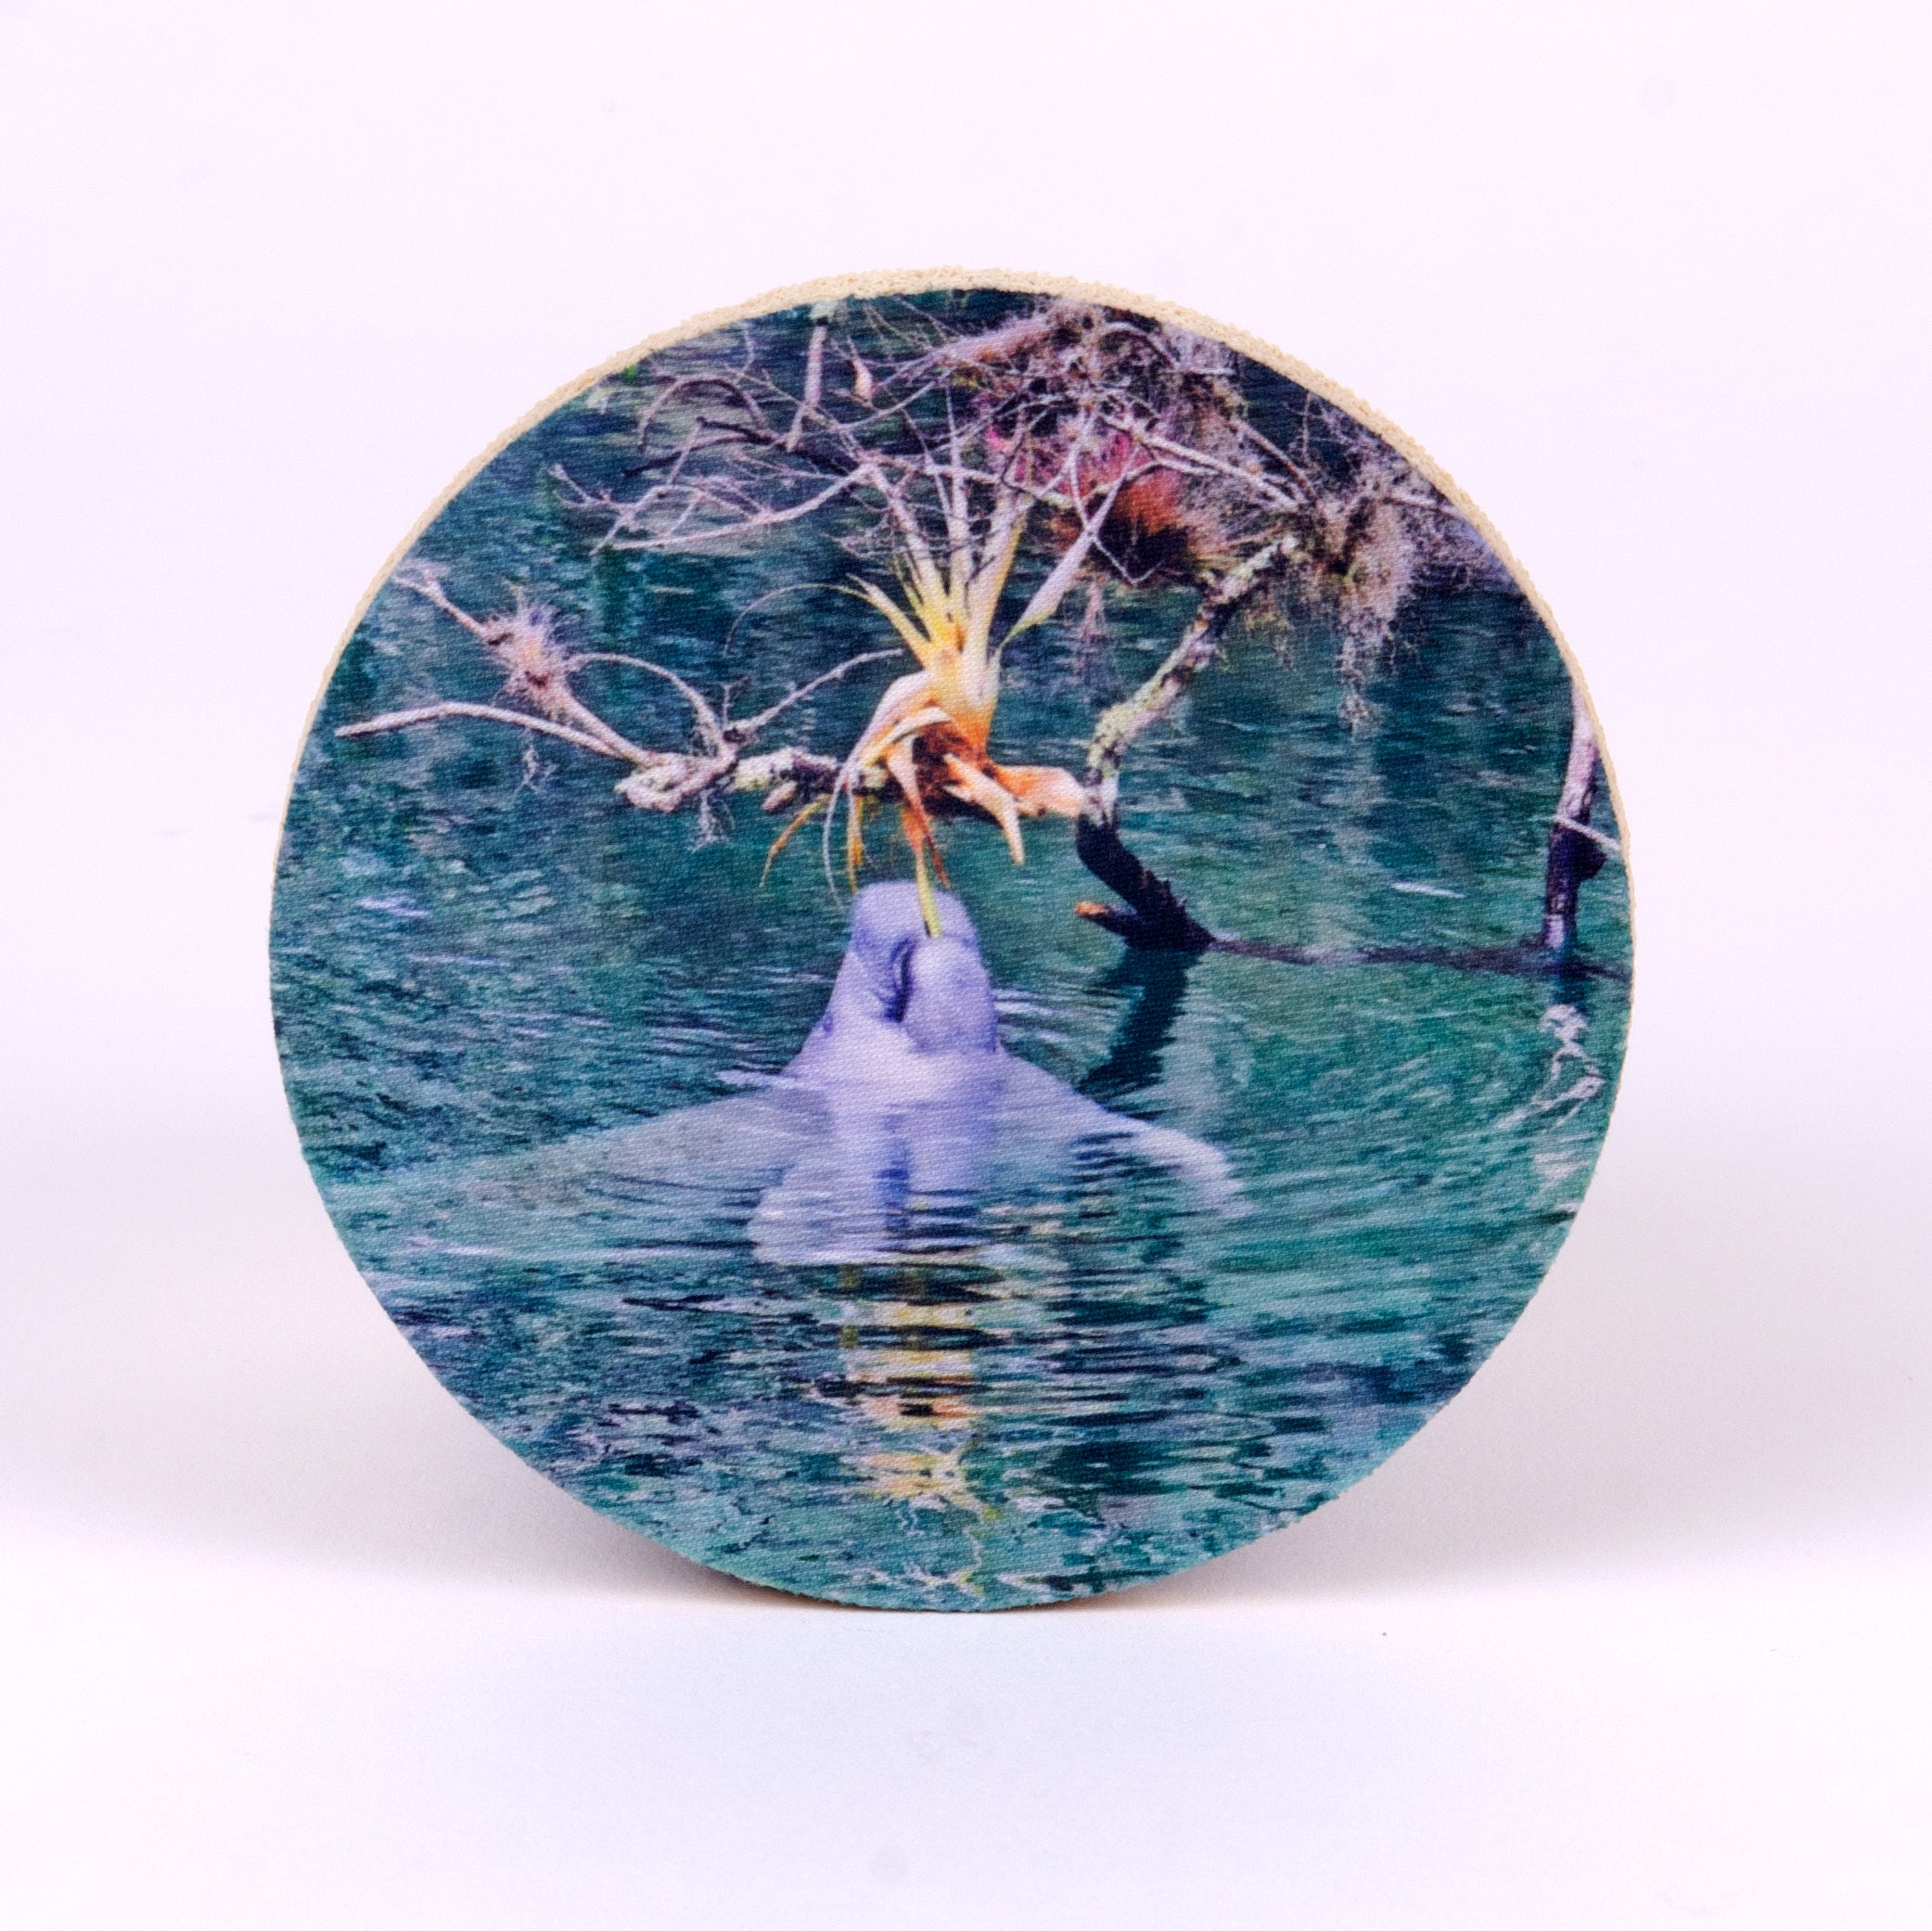 4" round rubber coaster with manatee